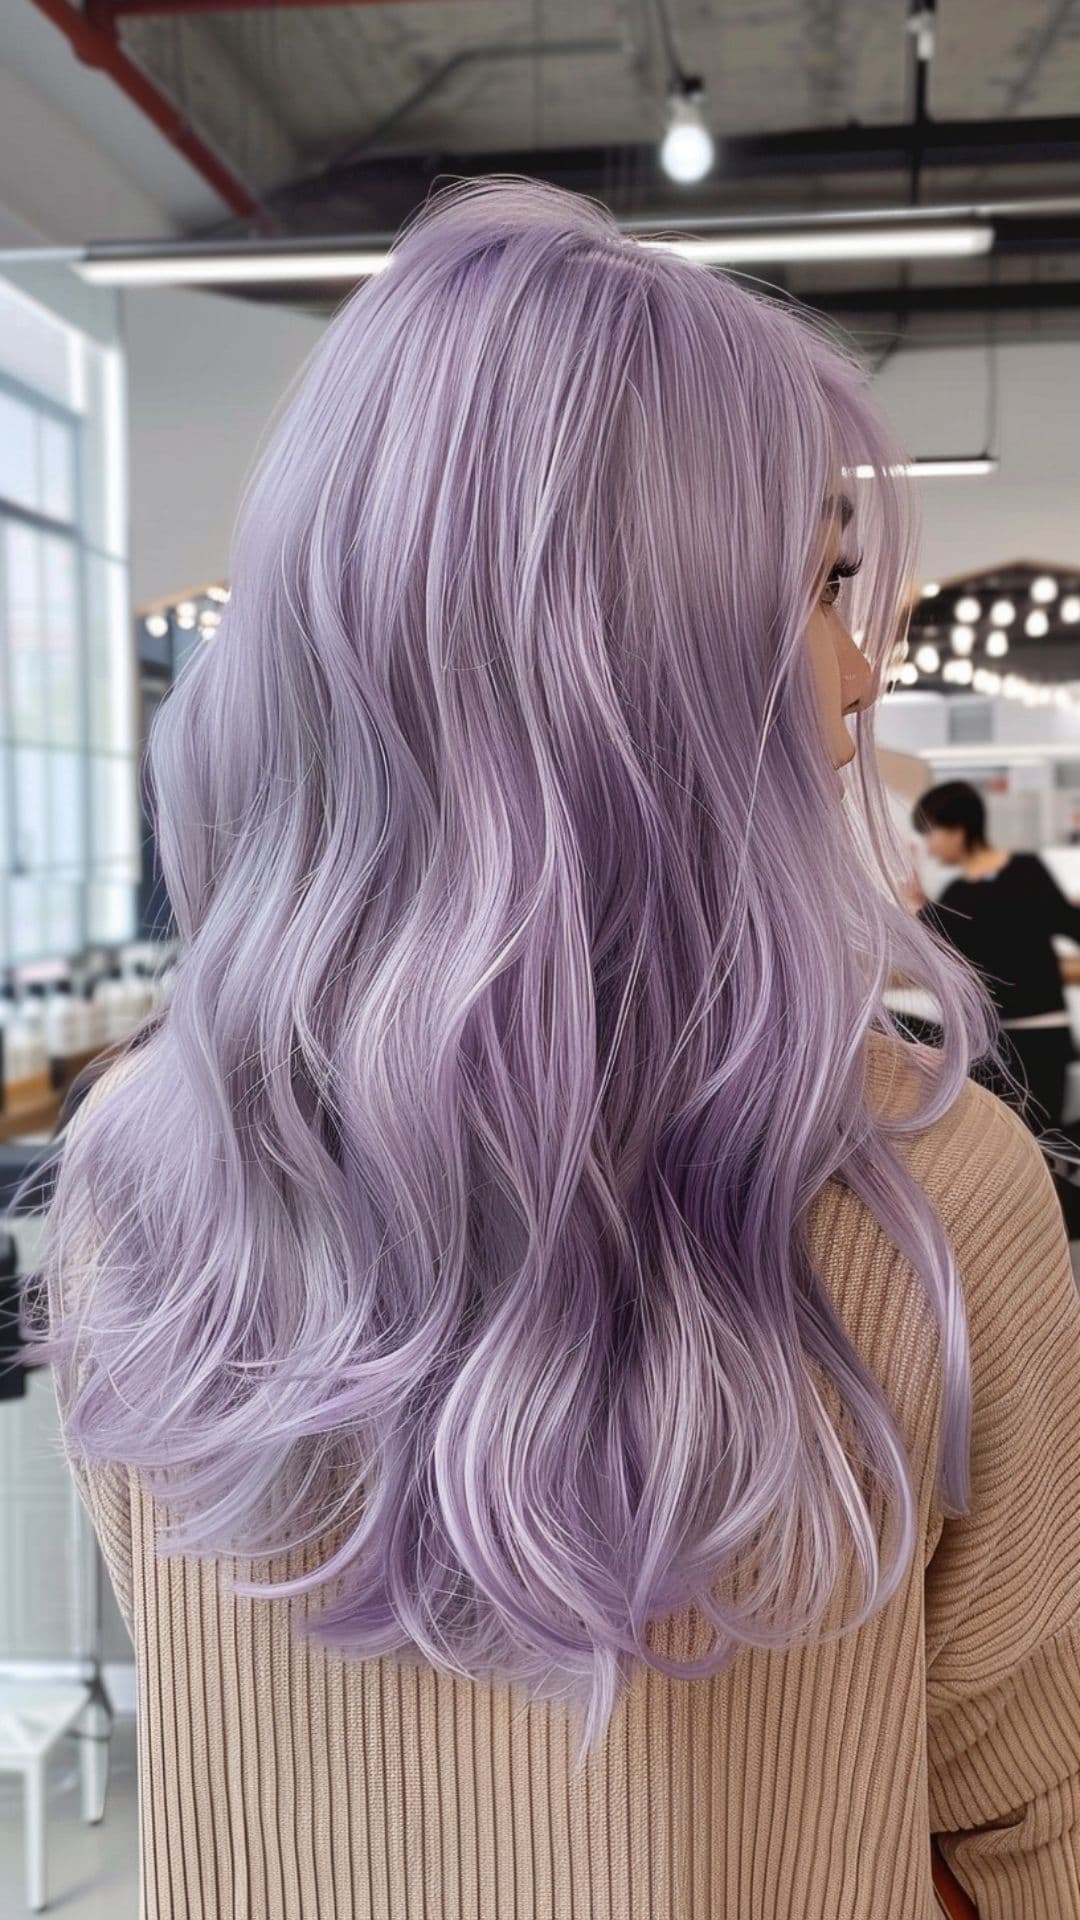 A woman modelling a lilac hair color.